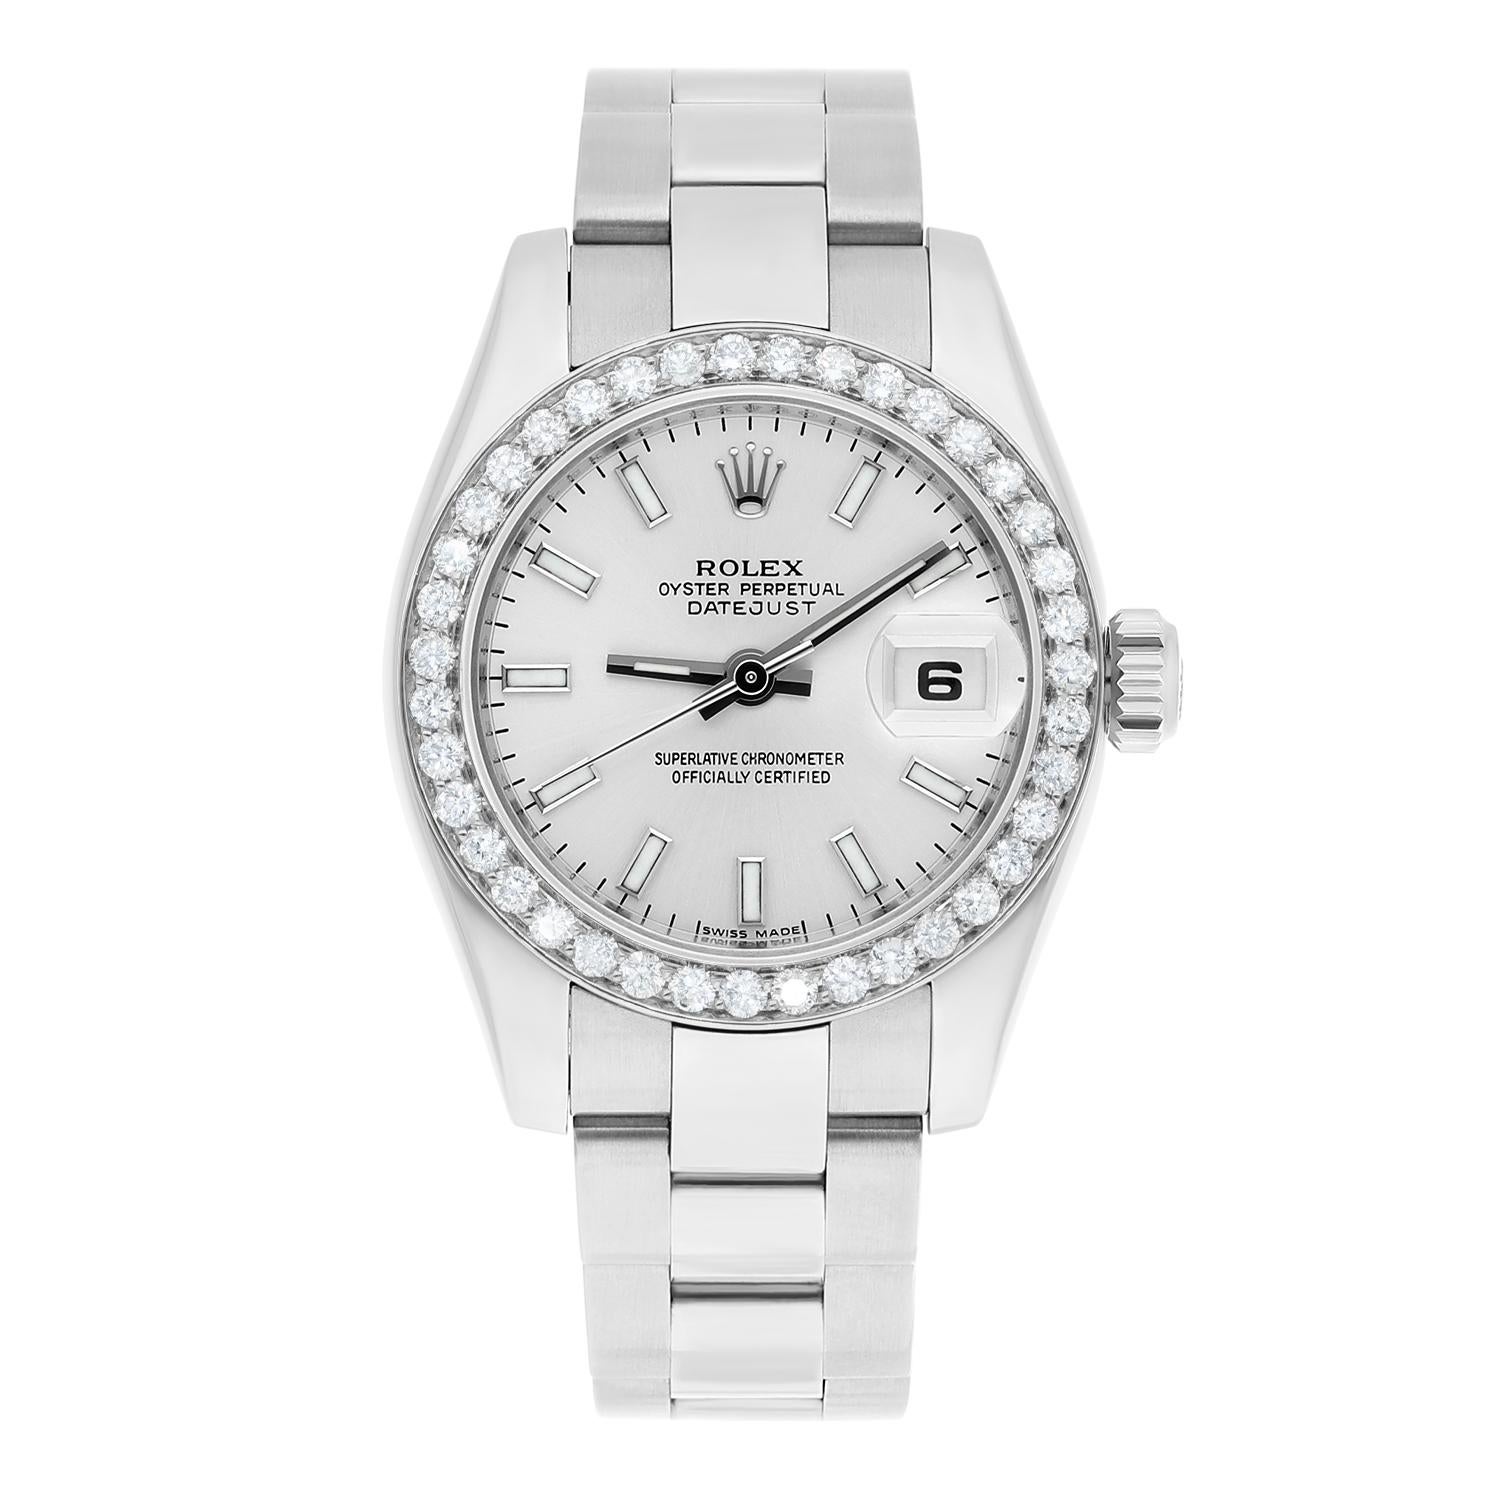 Brand: Rolex Series: Datejust Model: 179160 Case Diameter: 26 mm Bracelet: Oyster band; stainless steel Bezel: Custom diamond set Dial: Silver Index Carat Weight: 1.20 carats in total diamond weight The sale includes a jewelry watch box and an